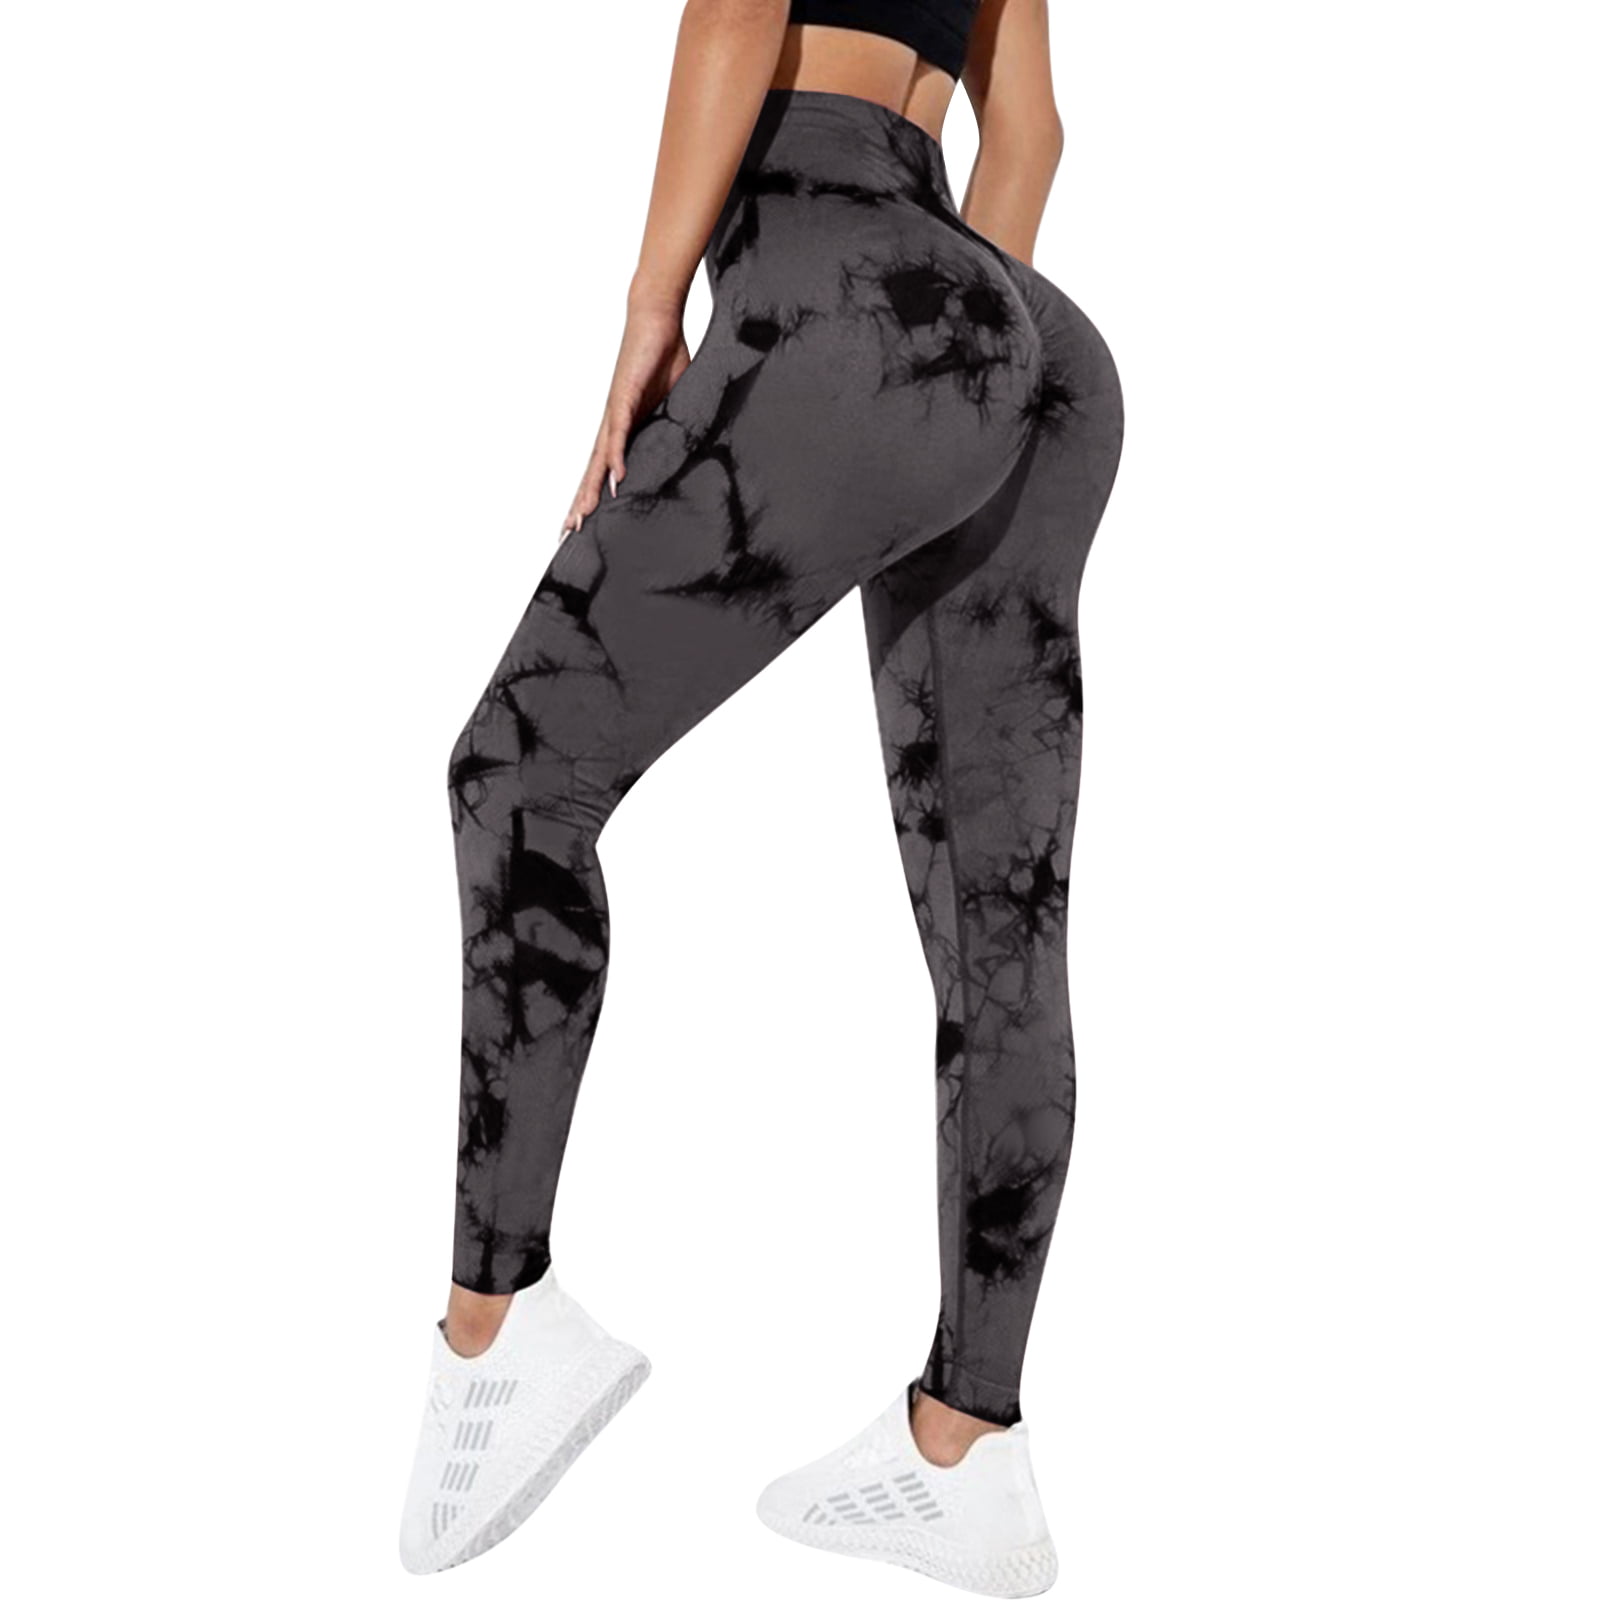 Tie Dye High Waisted Leggings Non See Through Workout Yoga Running Pants, Shop Today. Get it Tomorrow!